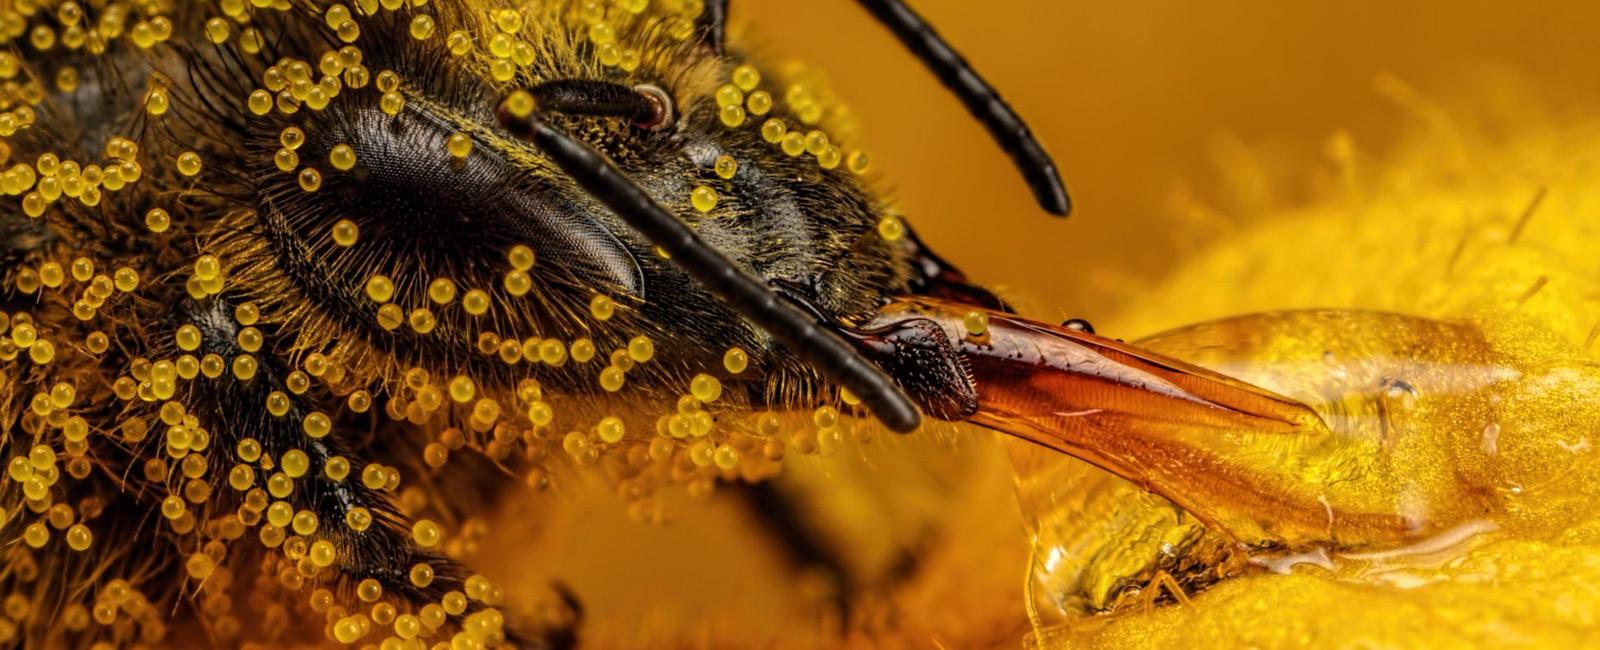 Honeybees have a type of hair on their eyes